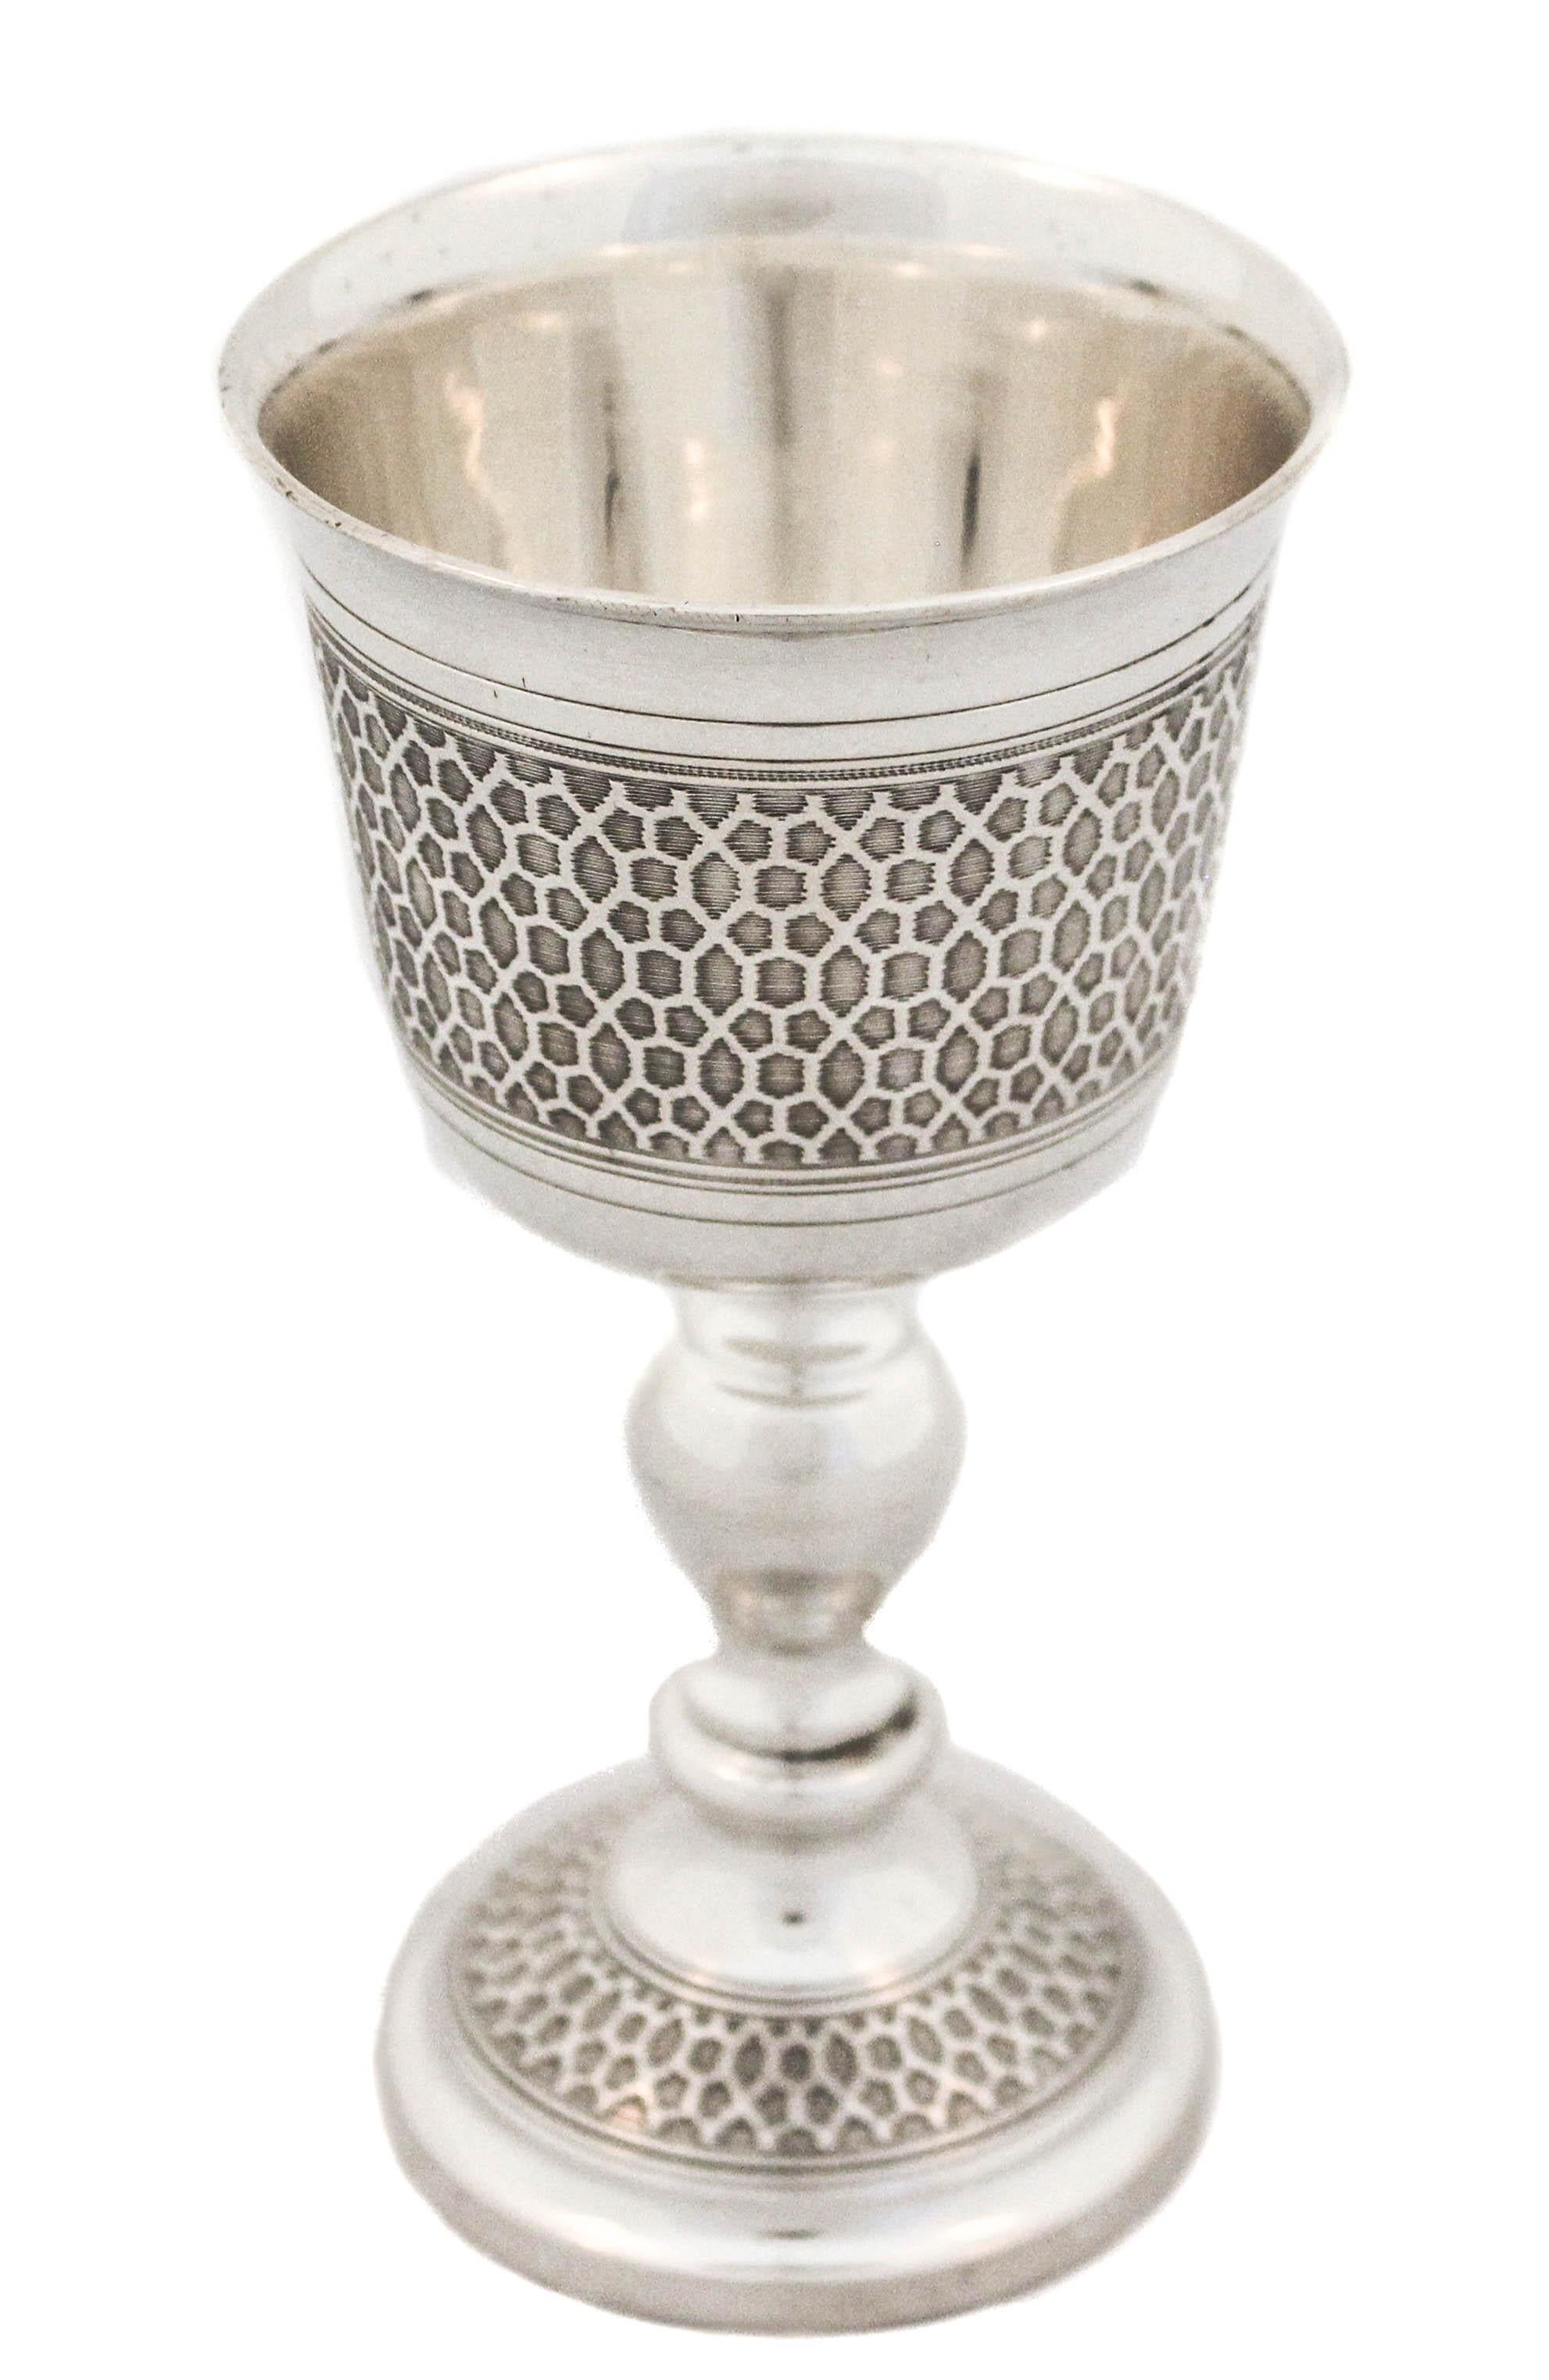 This sterling silver goblet is very unique.  Very few were made at the time and rarely come on the market.  There is a symmetrical pattern around the body and base that is reminiscent of Middle Eastern tile or ceiling designs.  It gives the cup a